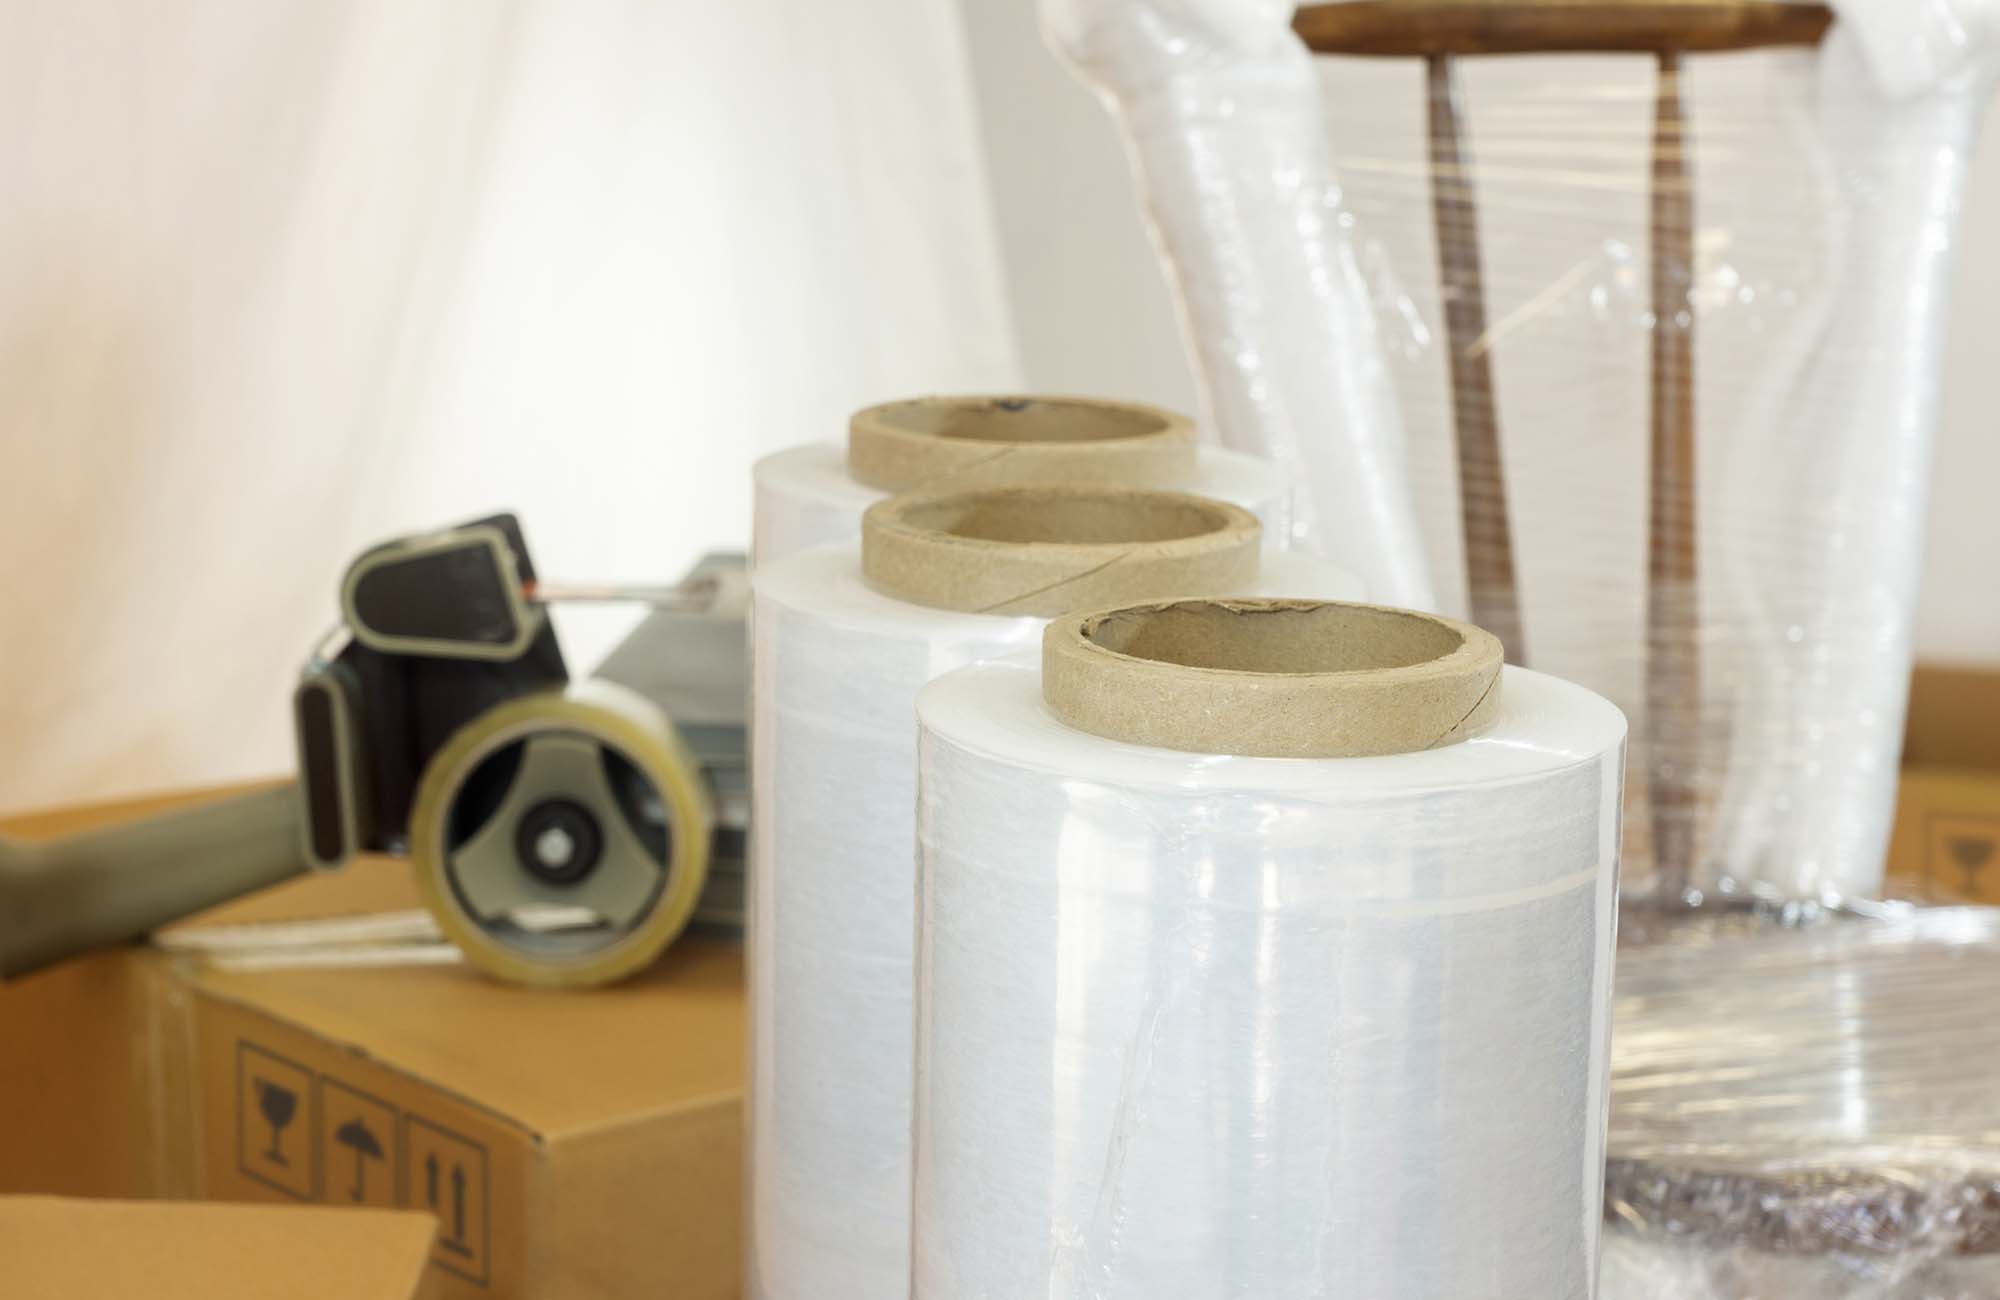 Approach to plastic rolls for packing in the foreground with a plastic wrapped chair, cardboard boxes and adhesive